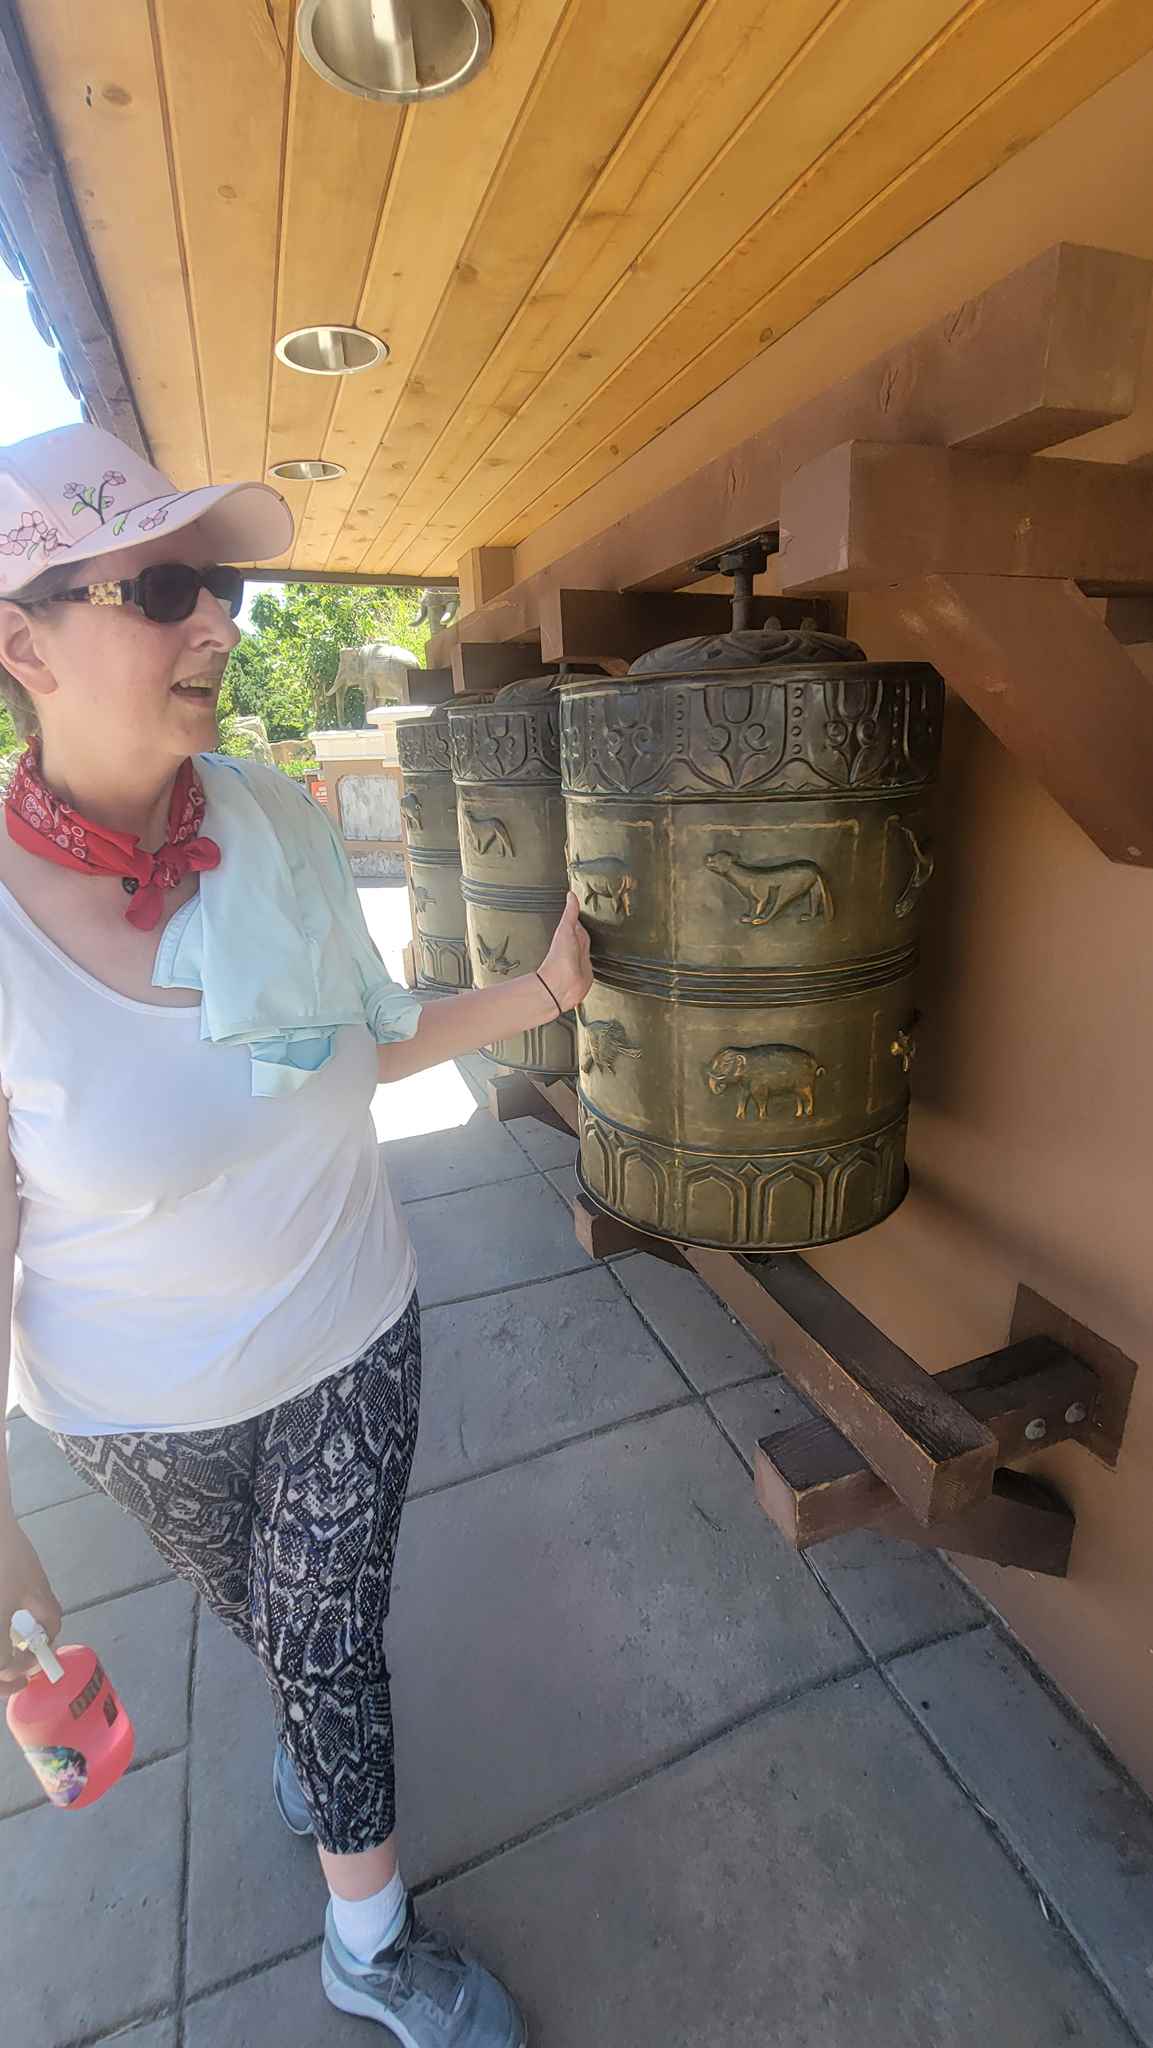 Diana playing with prayer wheels